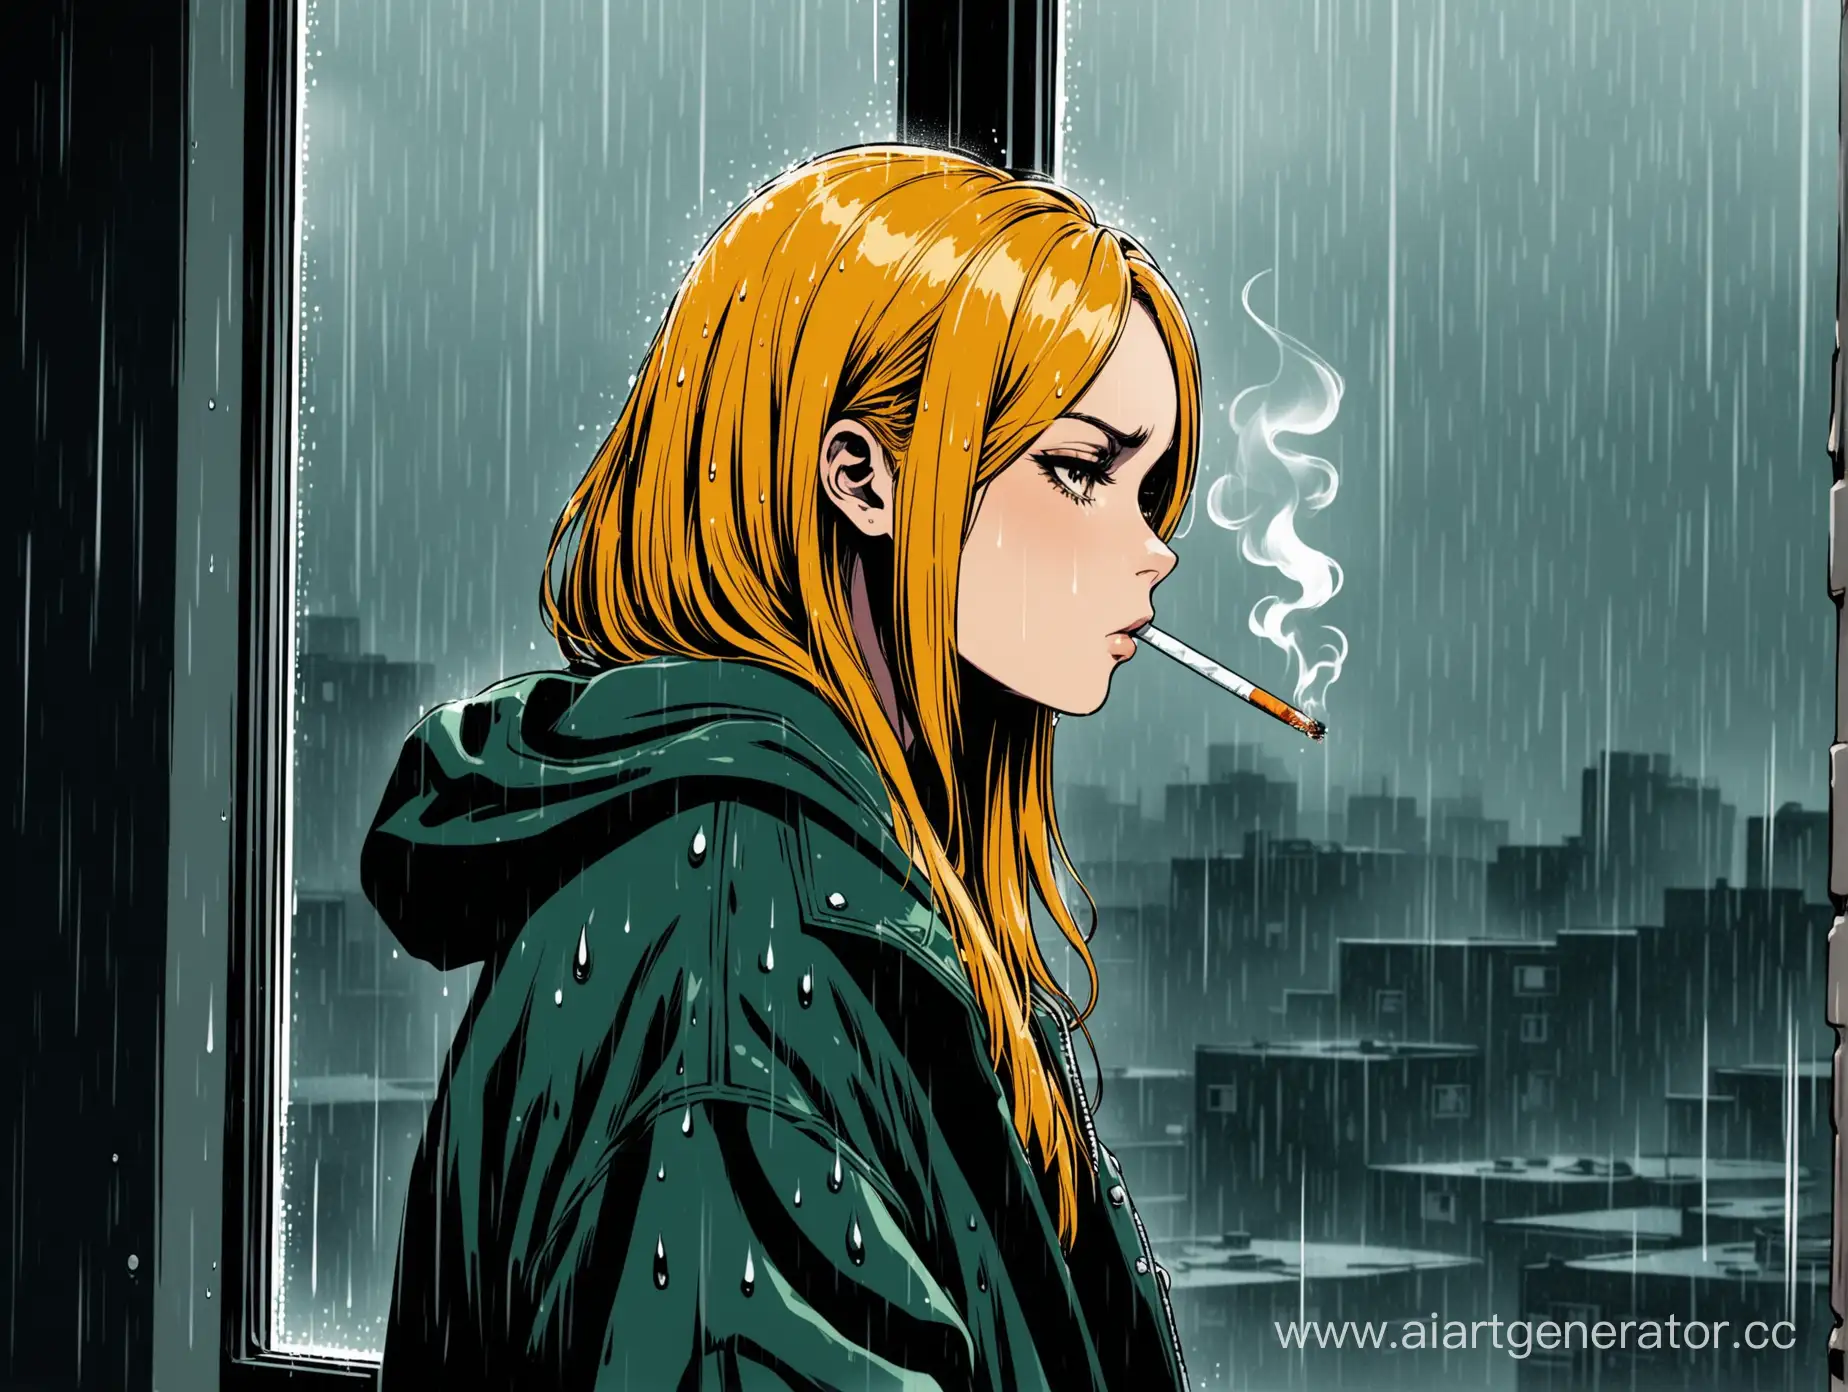 Lonely-Girl-Smoking-by-Rainy-Window-with-MONSTER-Logo